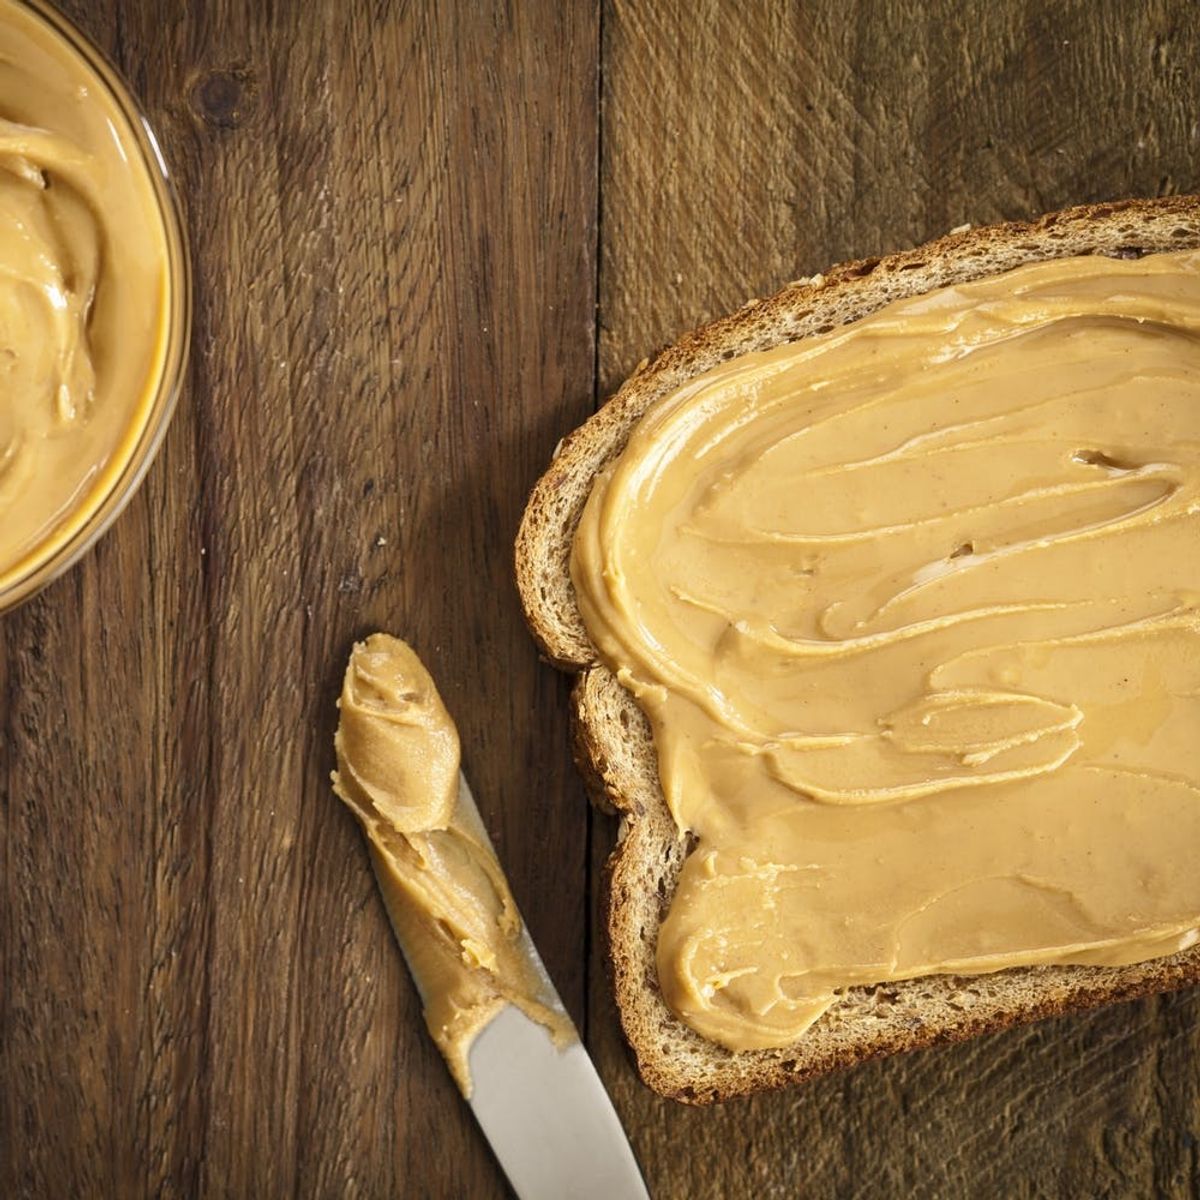 Peanut Butter May Become a Thing of the Past Thanks to Climate Change